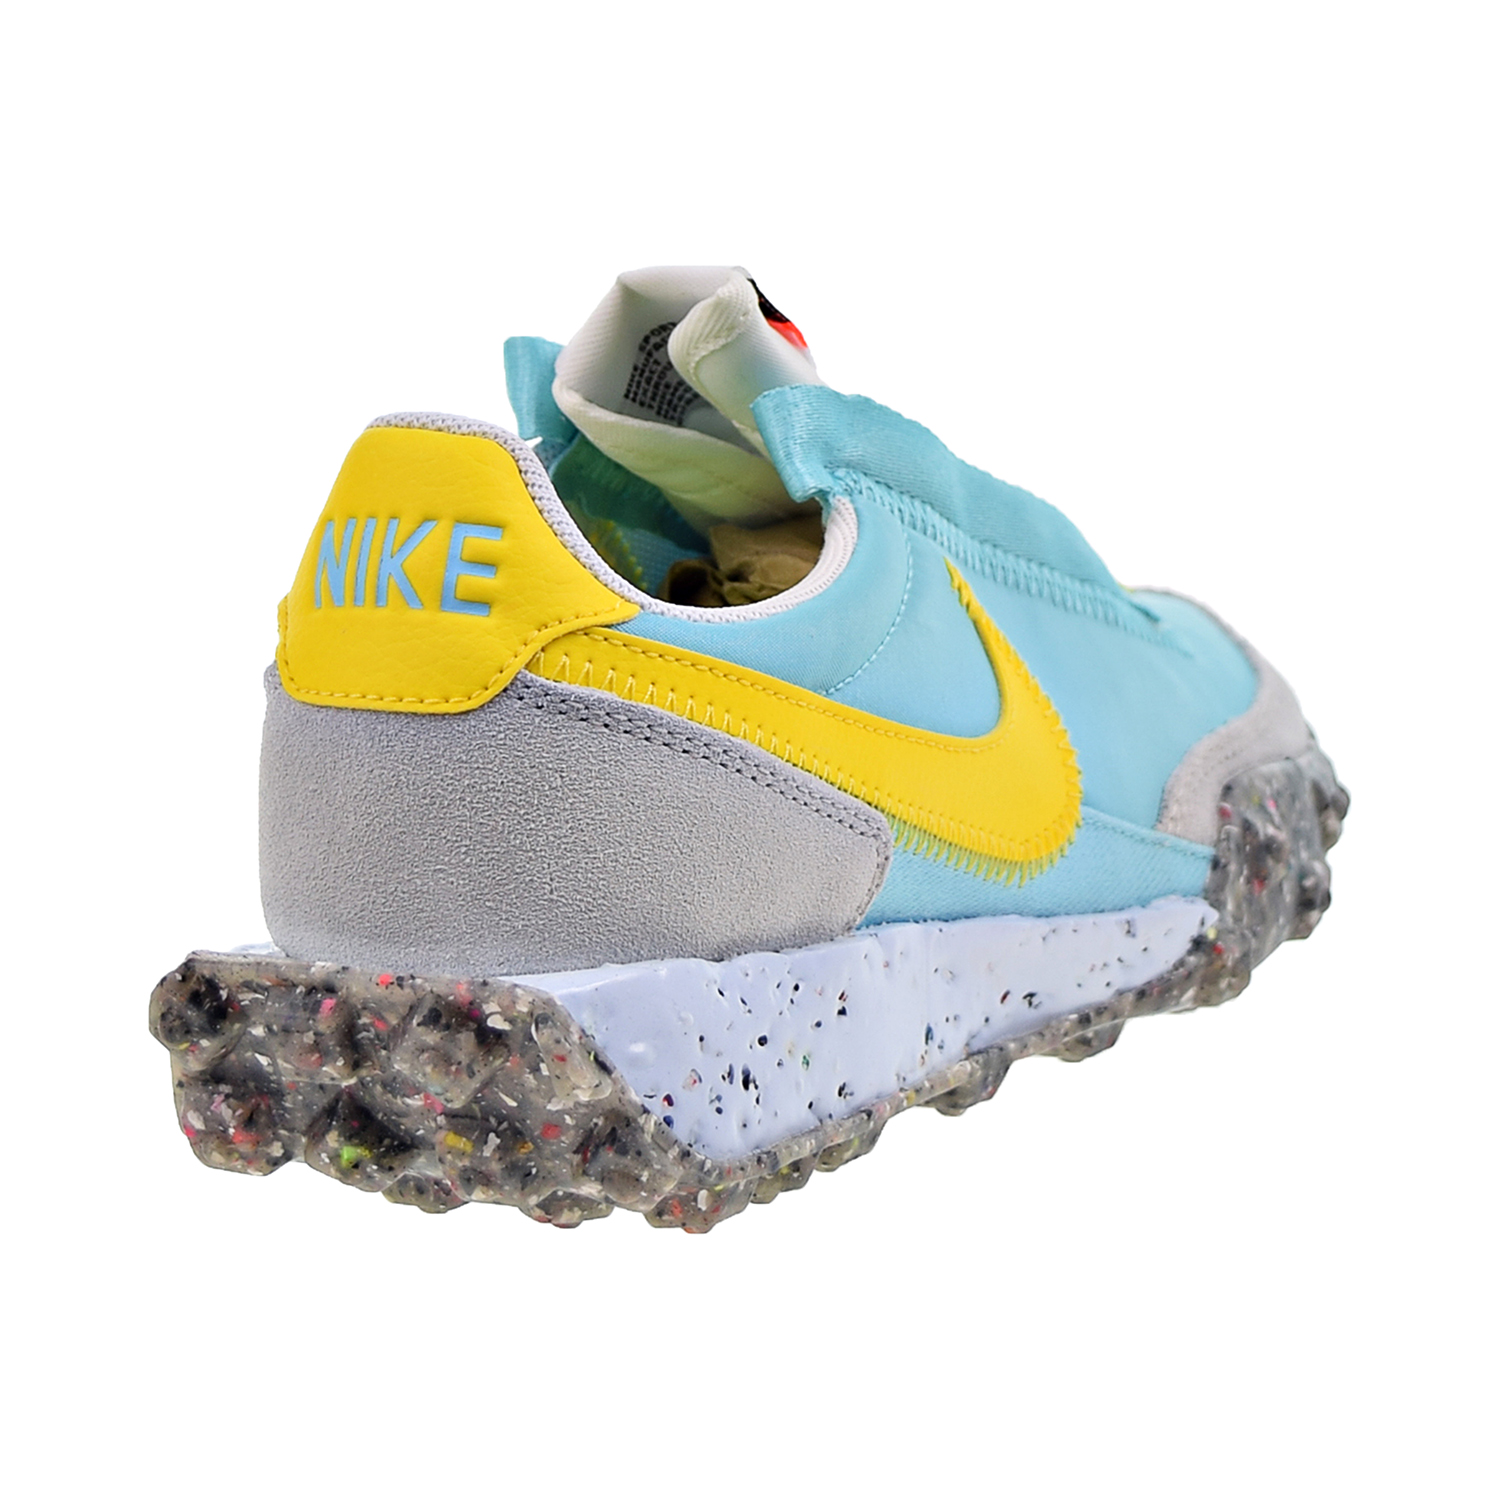 Nike Waffle Racer Crater Women's Shoes Bleached Aqua-Speed Yellow ct1983-400